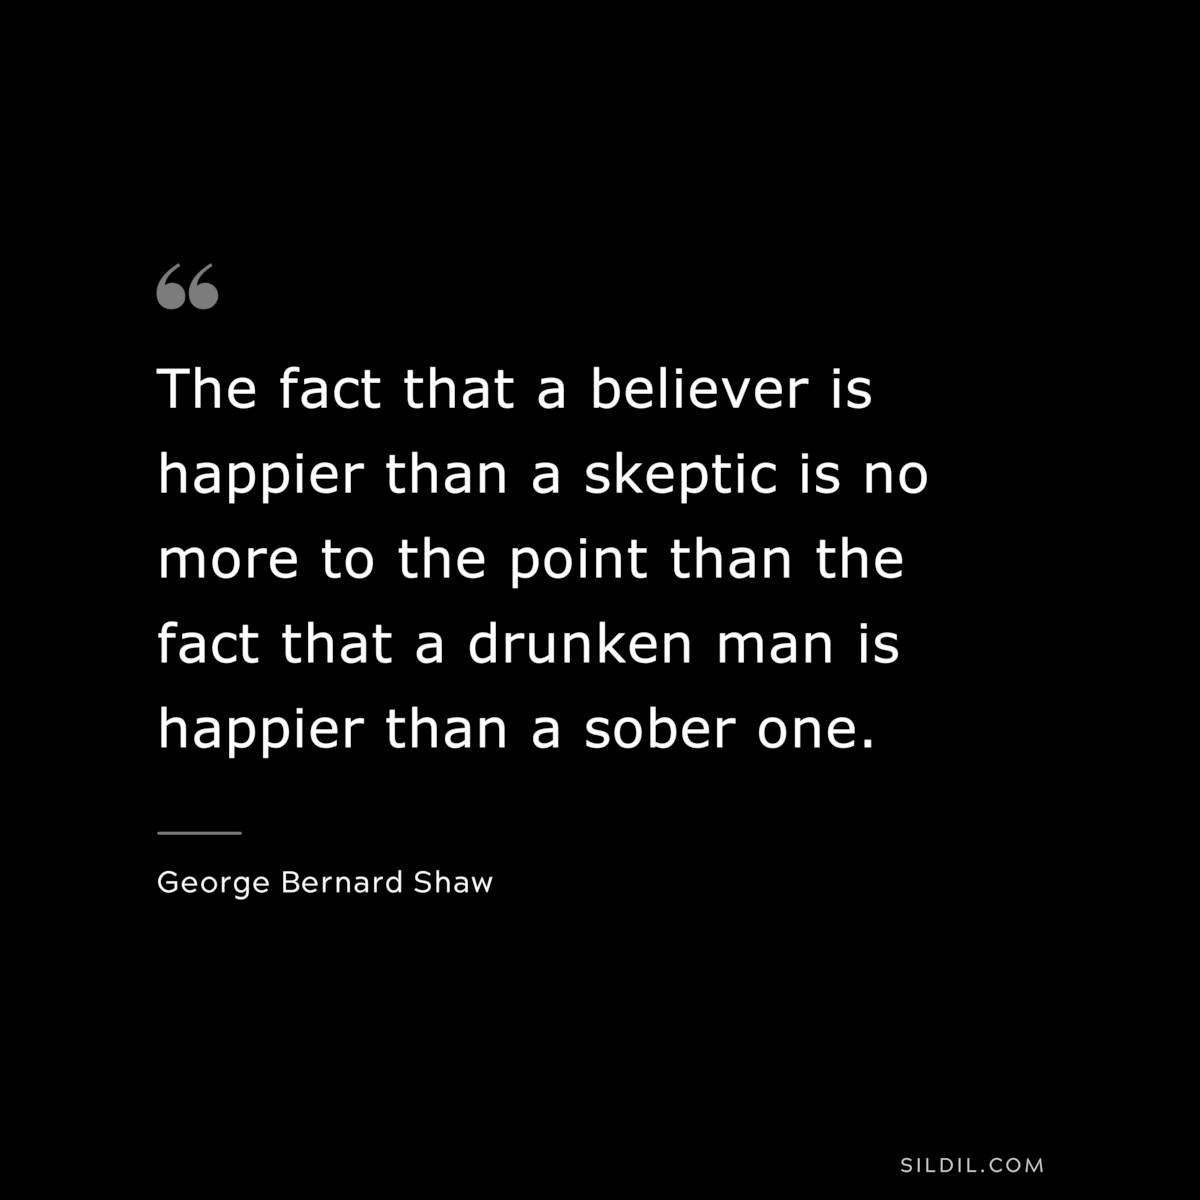 The fact that a believer is happier than a skeptic is no more to the point than the fact that a drunken man is happier than a sober one. ― George Bernard Shaw